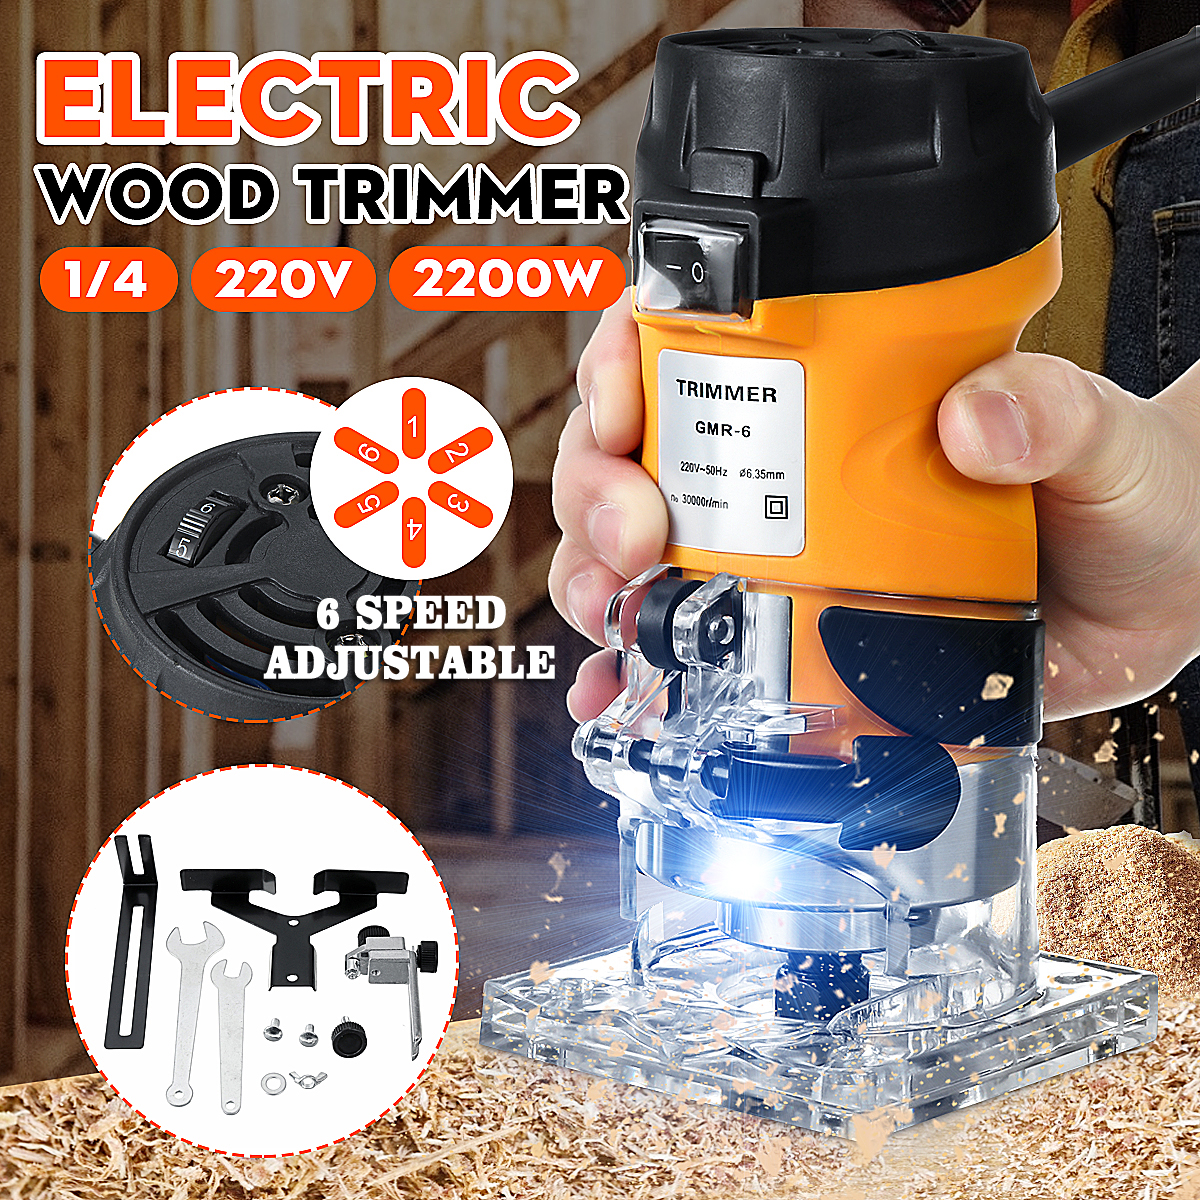 220V-2200W-635mm-Electric-Handheld-Machine-Trimmer-6-Gear-Adjustable-Woodworking-Palm-Router-Wood-Ca-1625377-2